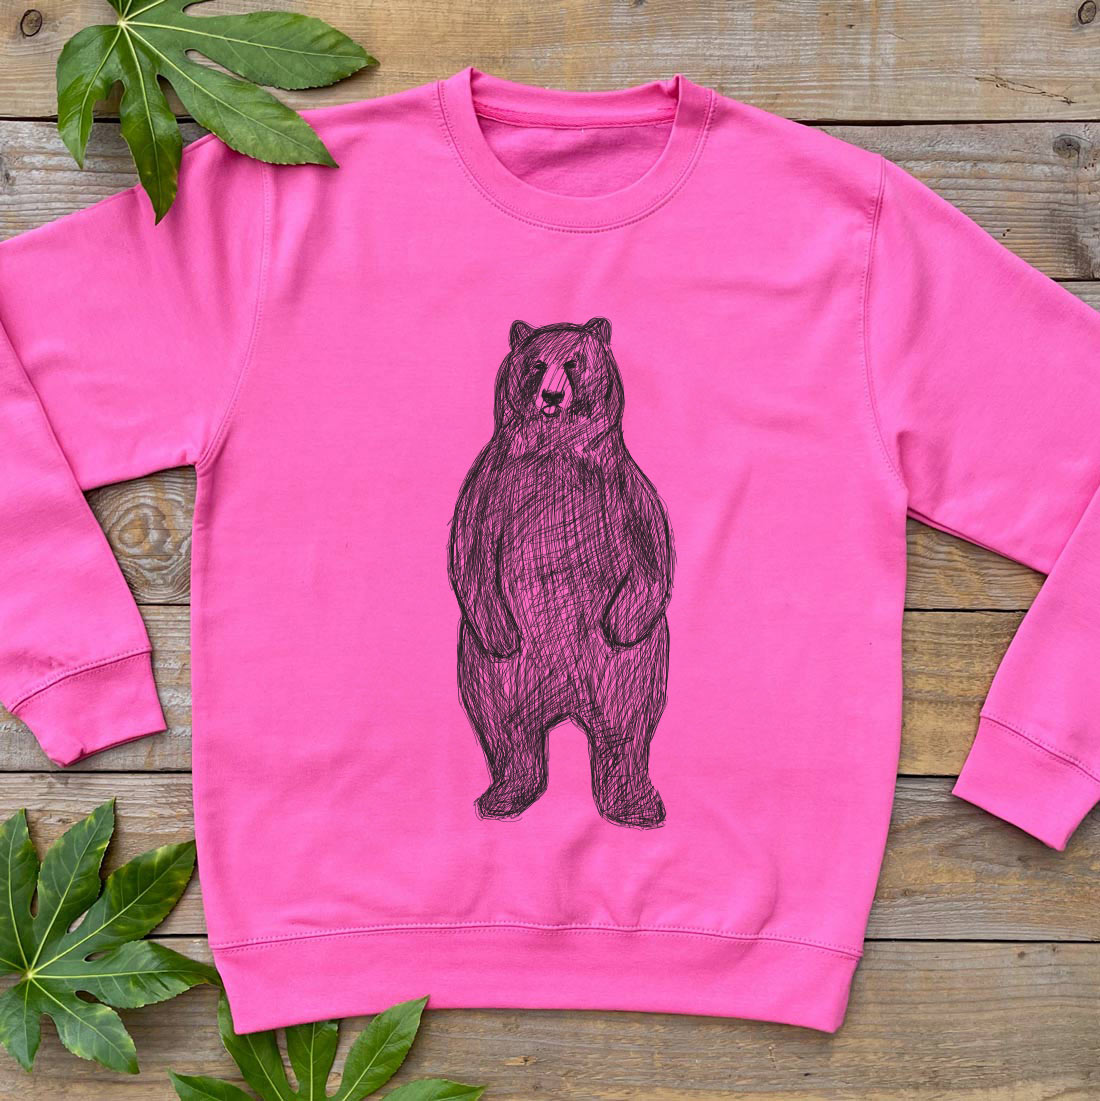 PINK JUMPER WITH BEAR STANDING